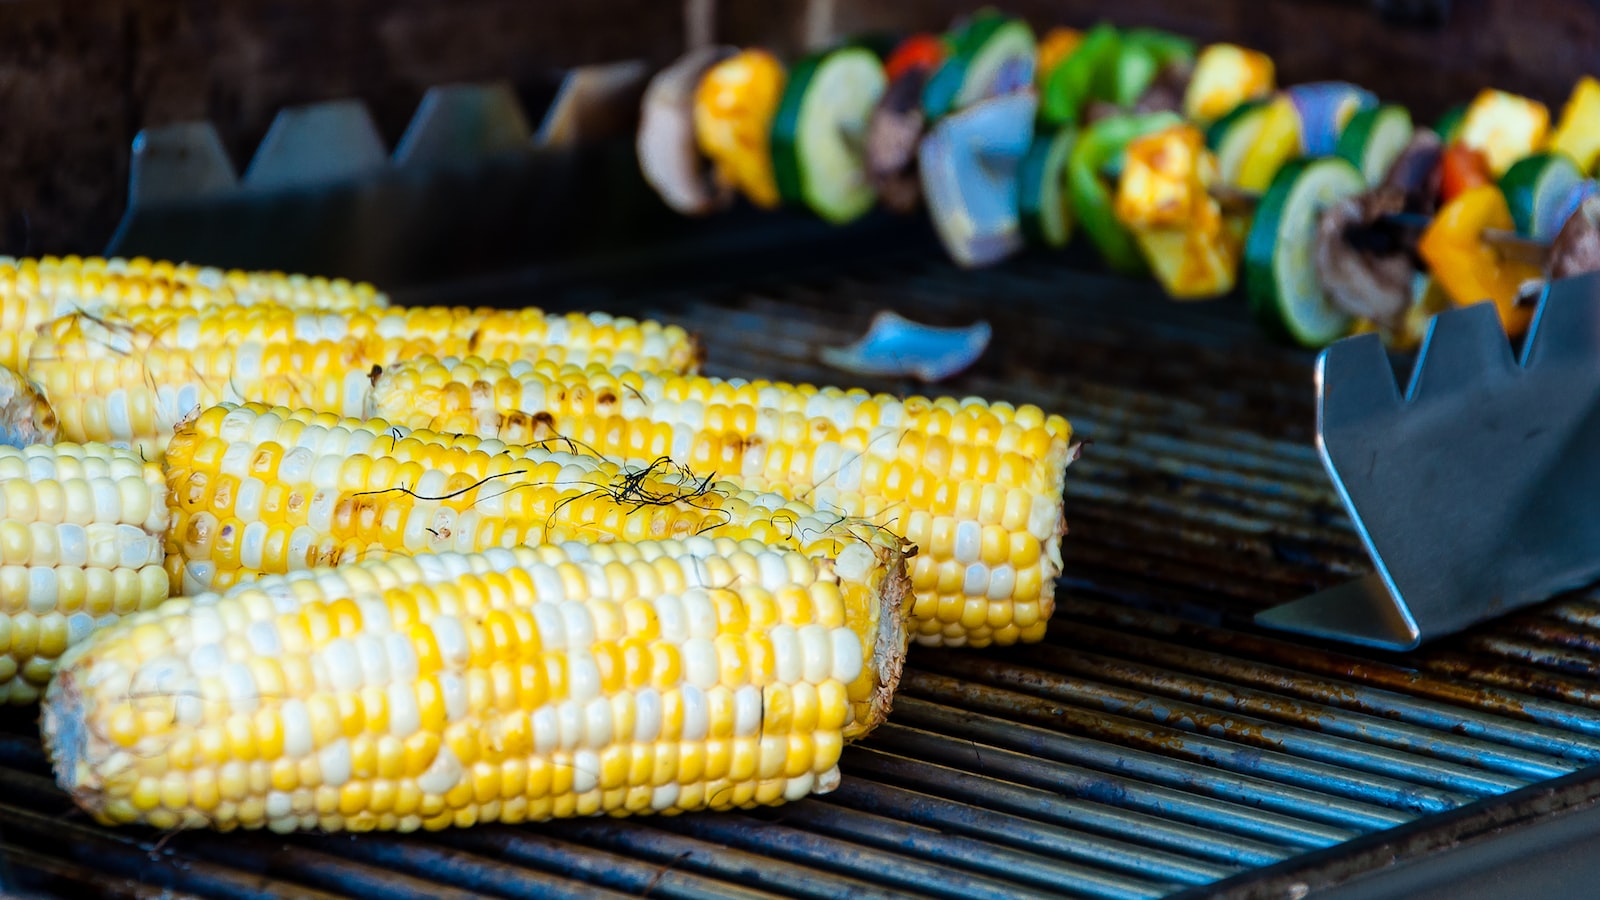 2. From Street Corn to Gourmet Delights: A Journey through Mexico City's Grilled Corn Traditions